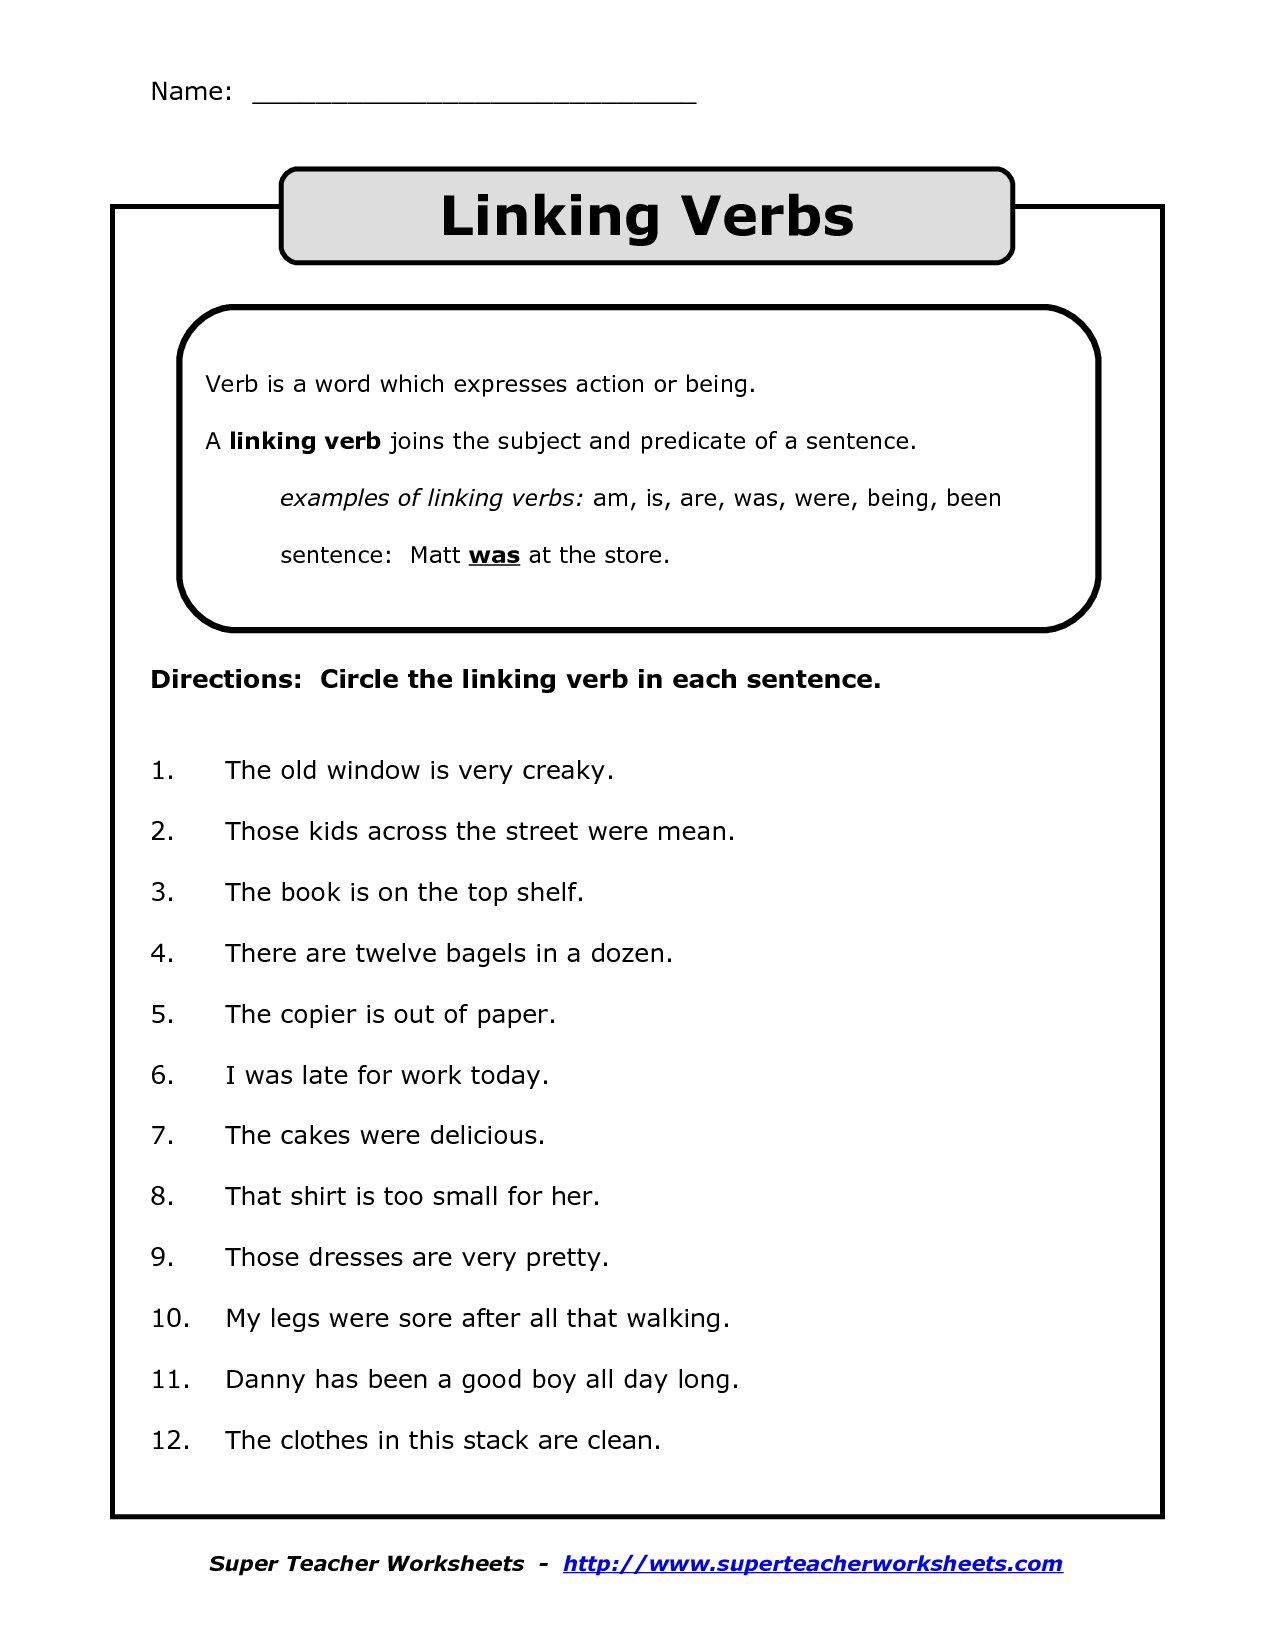 Linking Verbs Worksheets For 5th Graders